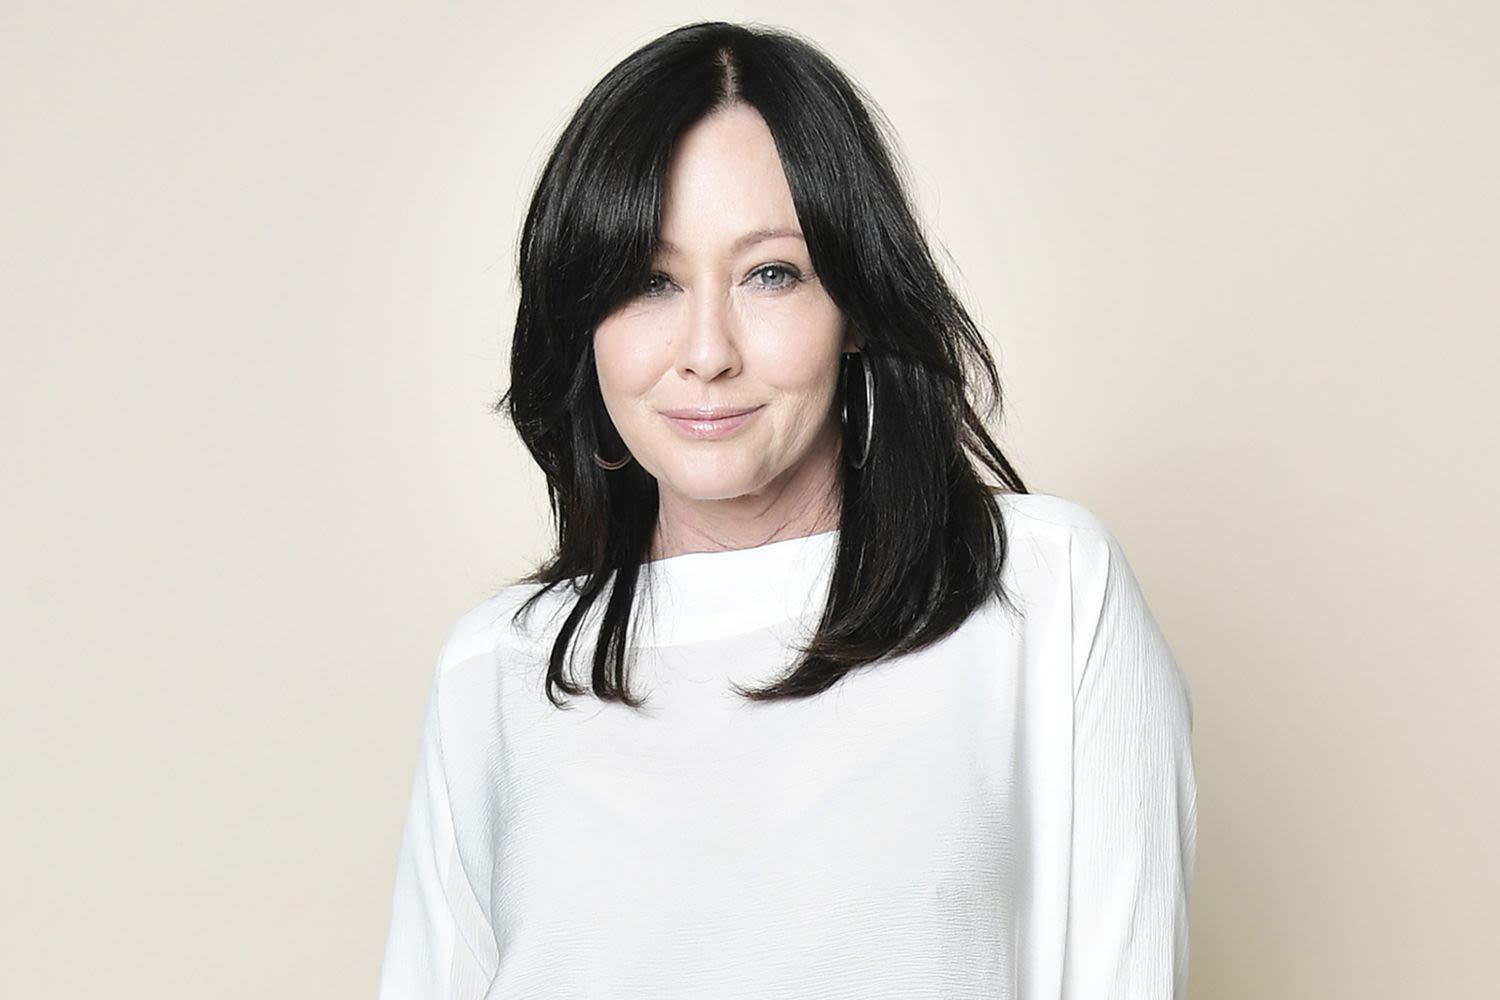 Why Shannen Doherty Believes Her Father's Illnesses Affected Her Choices in Men: 'There's Only a Few That Mattered'